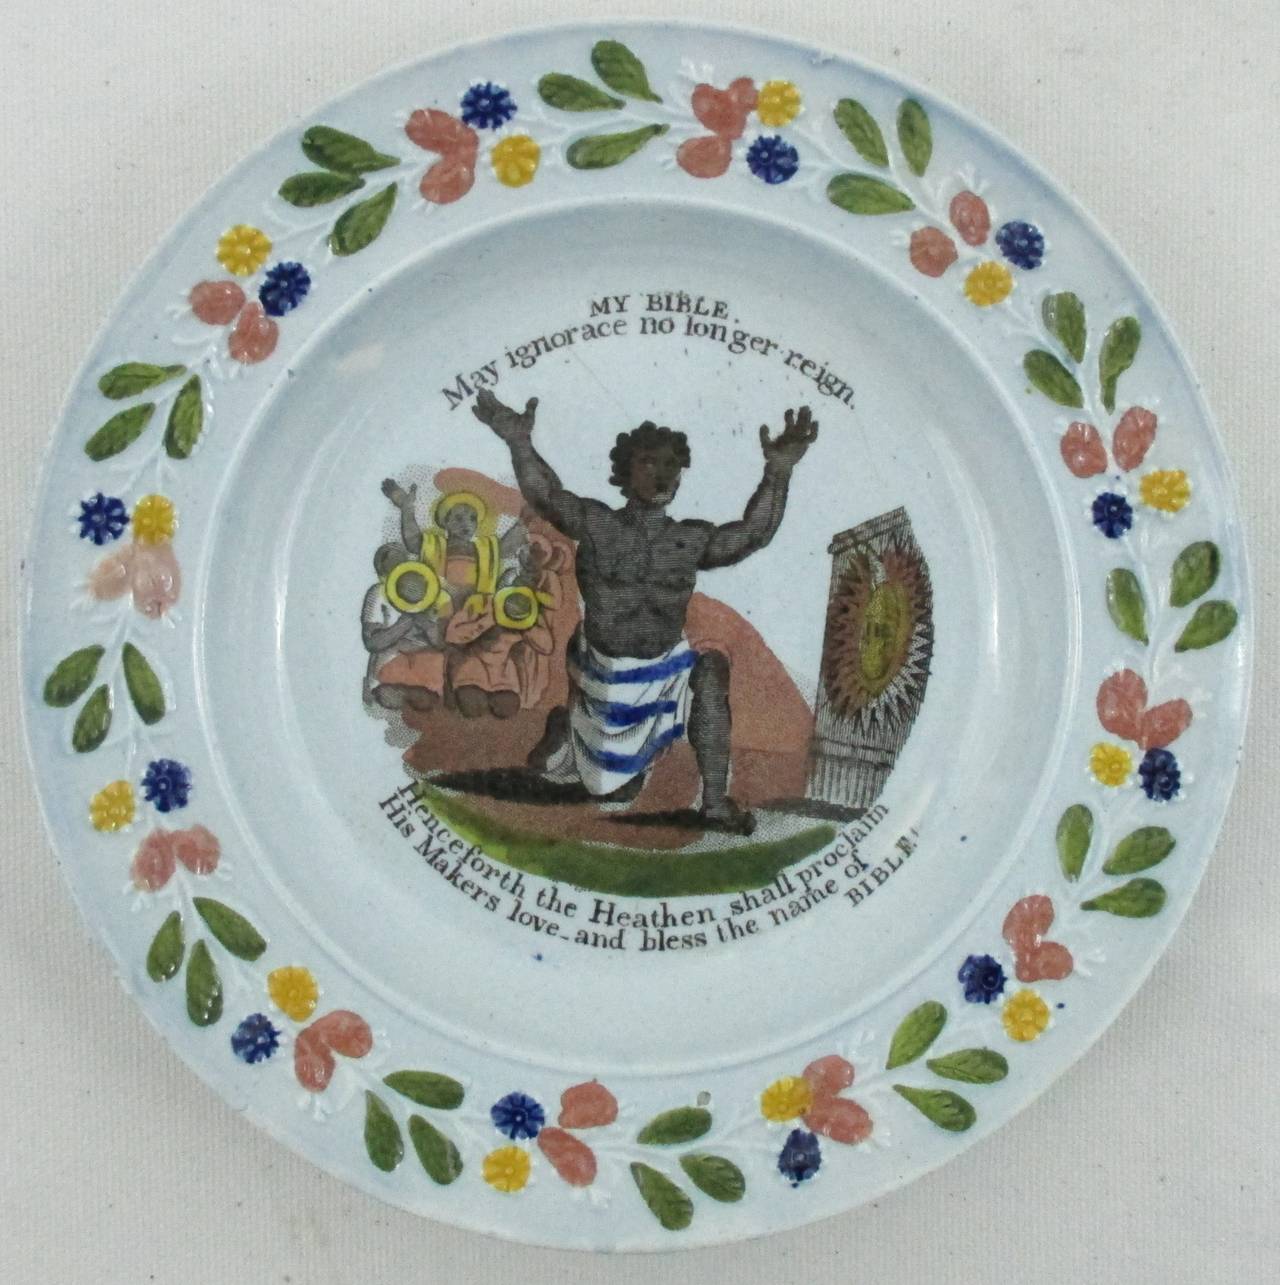 Printed and hand painted Staffordshire child's plate. for further information and discussion of this object see Winterthur Museum's online collection.